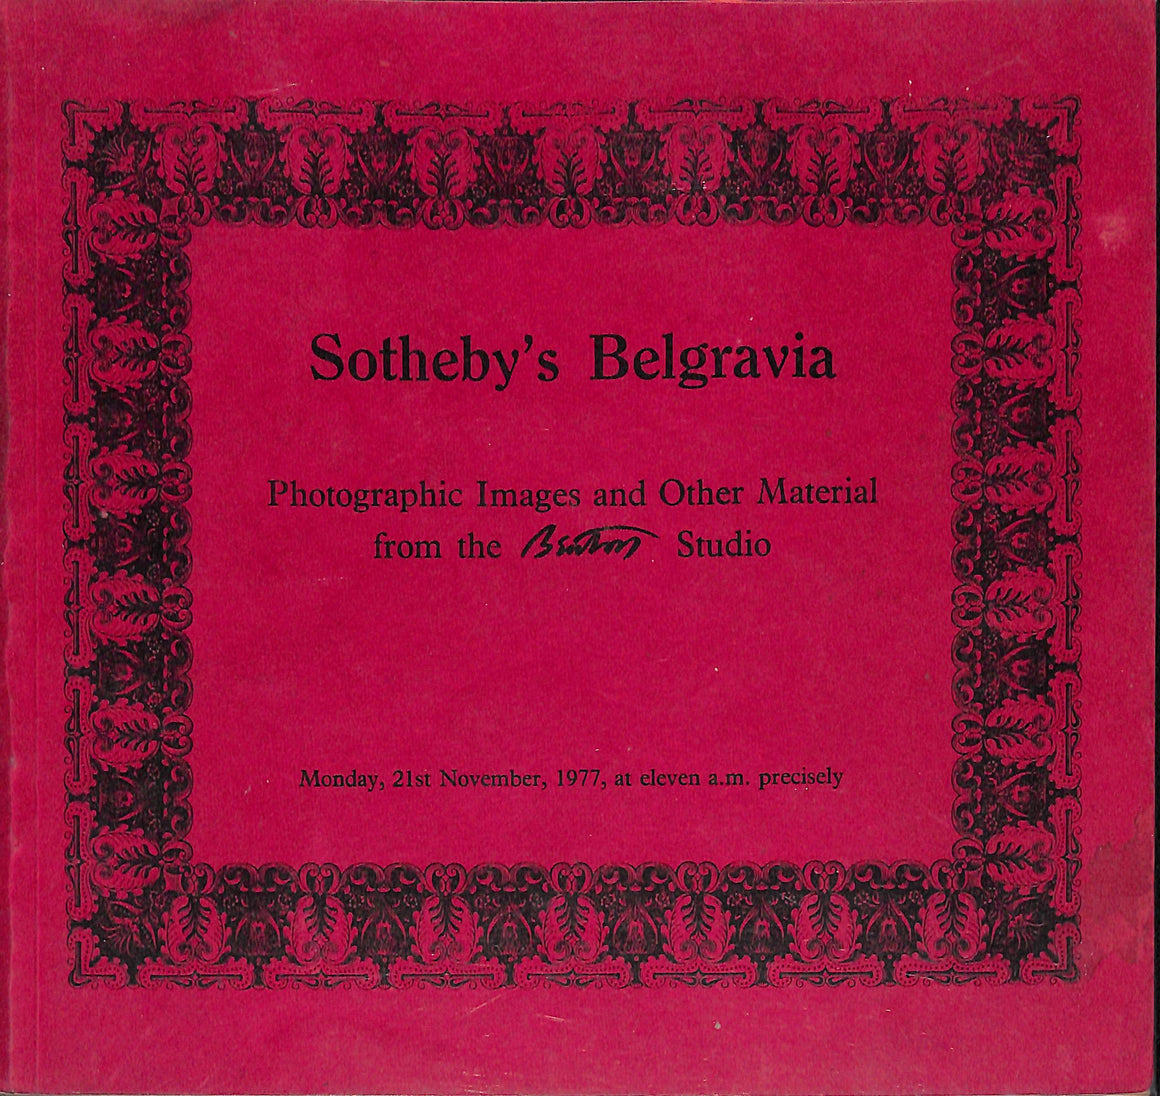 "Photographic Images and Other Material from the Beaton Studio" 1977 Sotheby's Belgravia